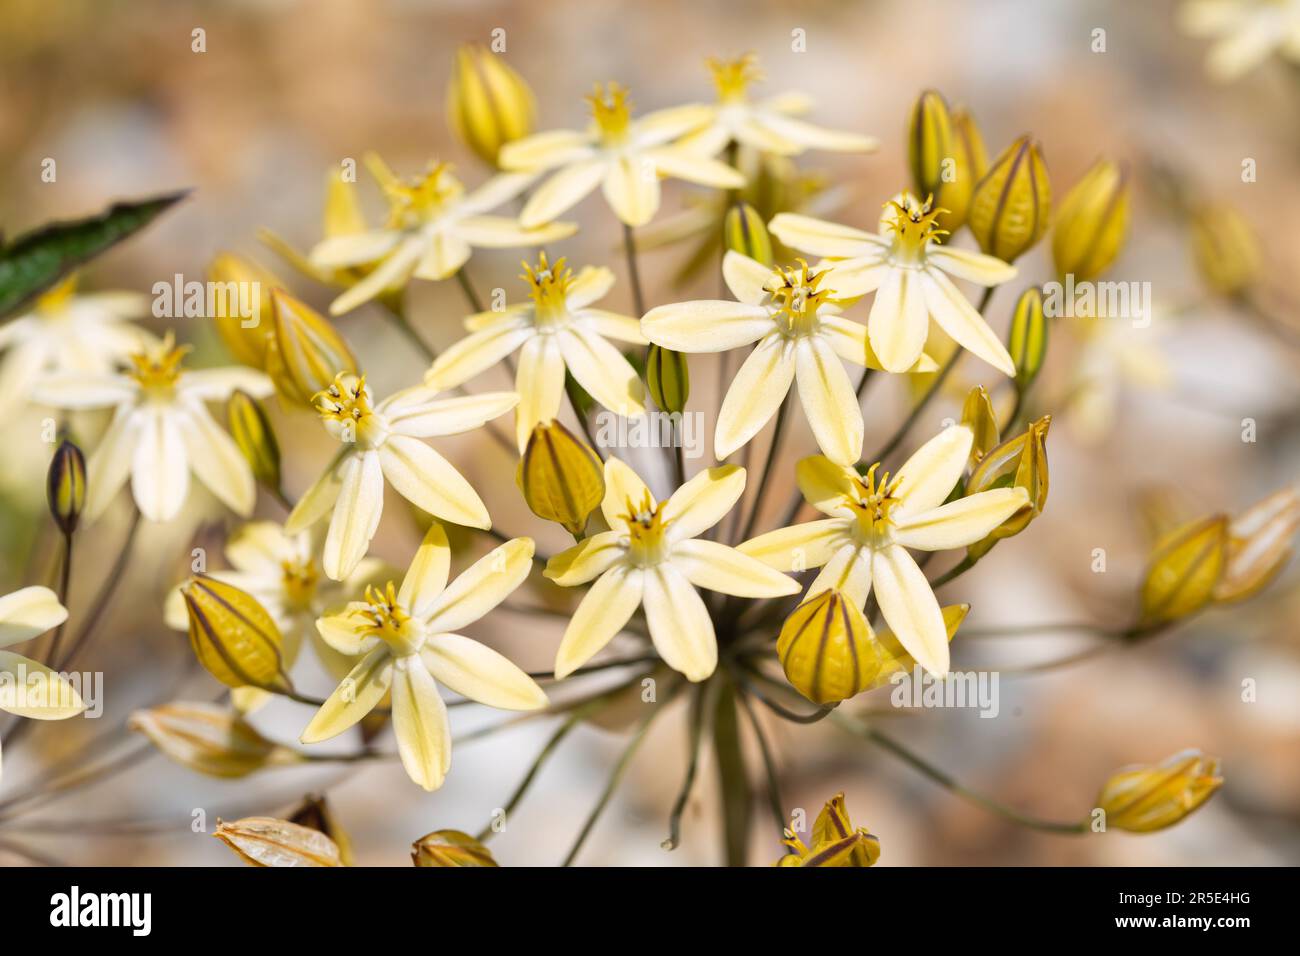 Macro photograph of the pretty, star-shaped golden yellow flowers of Triteleia ixioides, ' Starlight' . Stock Photo